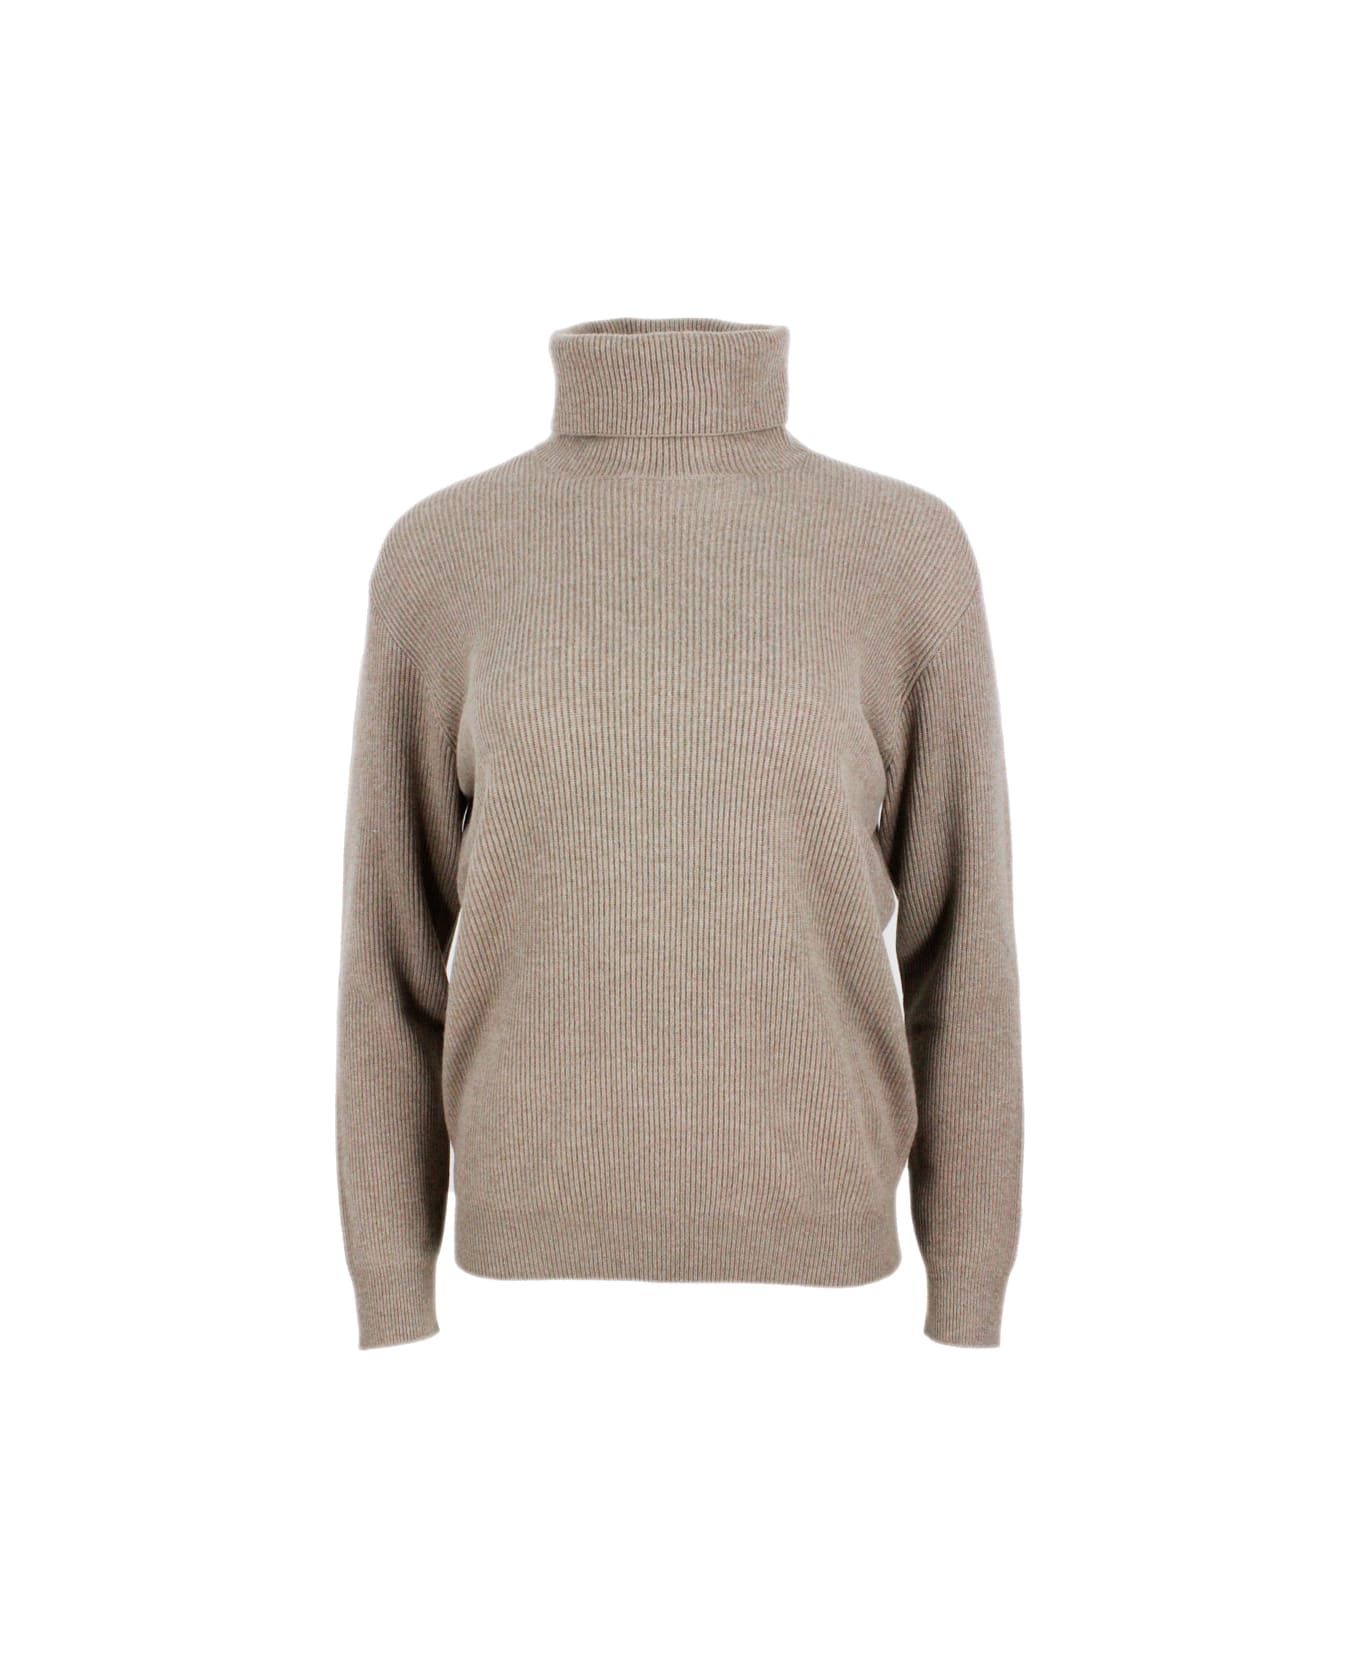 Brunello Cucinelli High Neck Sweater In Soft And Pure Cashmere Half English Rib With Monili Detail On The Neck In The Back - Tobacco ニットウェア